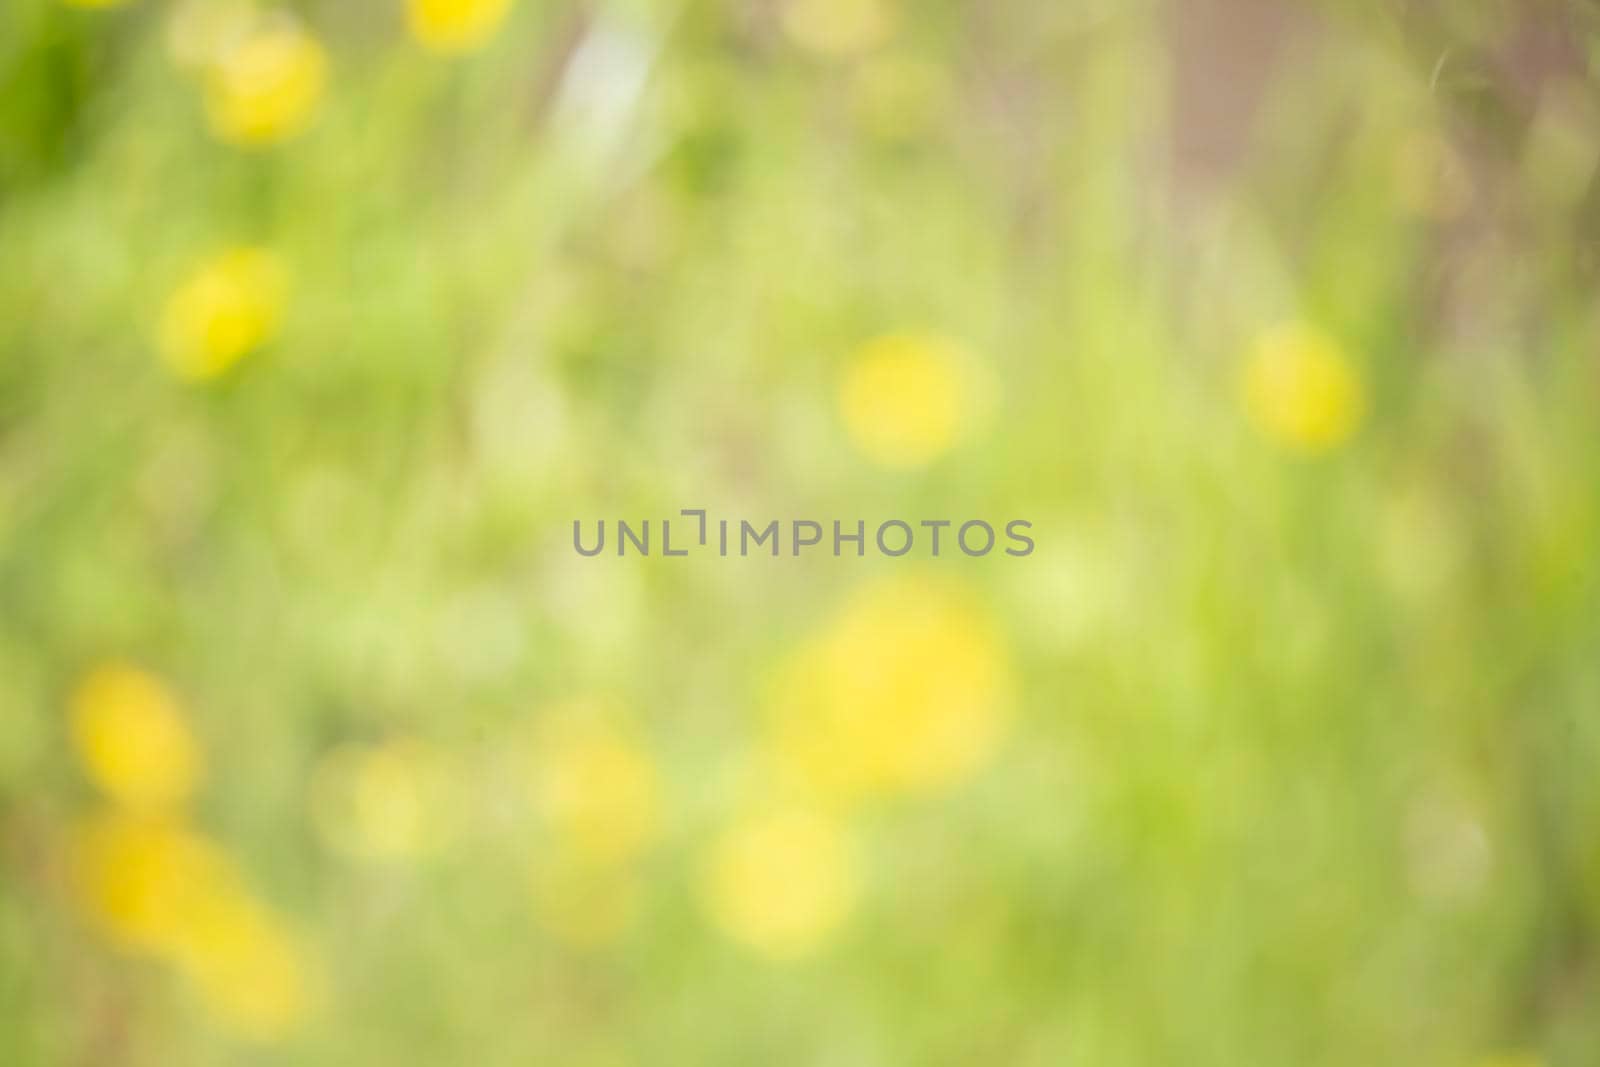 Blurred yellow flowers and greenery for a background